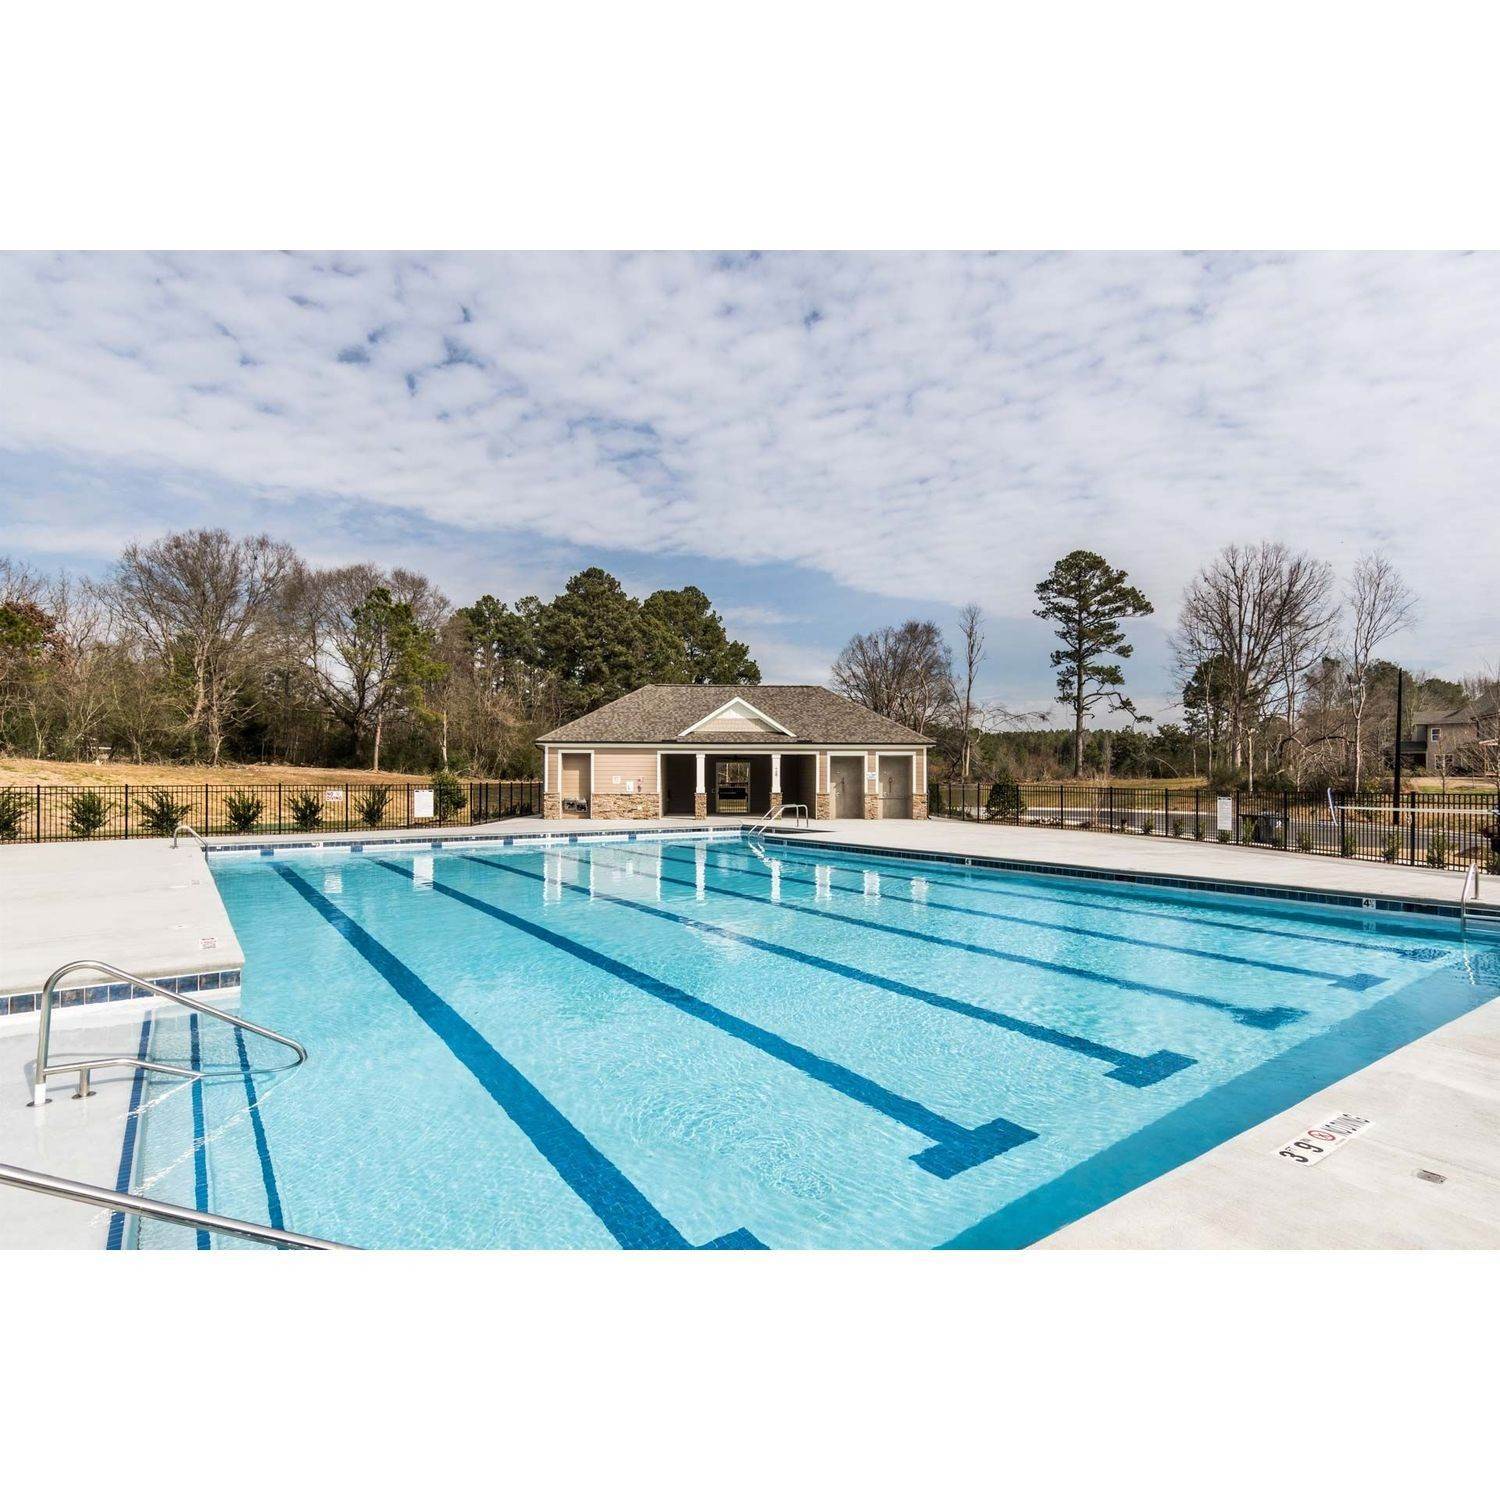 17. building at 720 Glenmere Dr, Knightdale, NC 27545